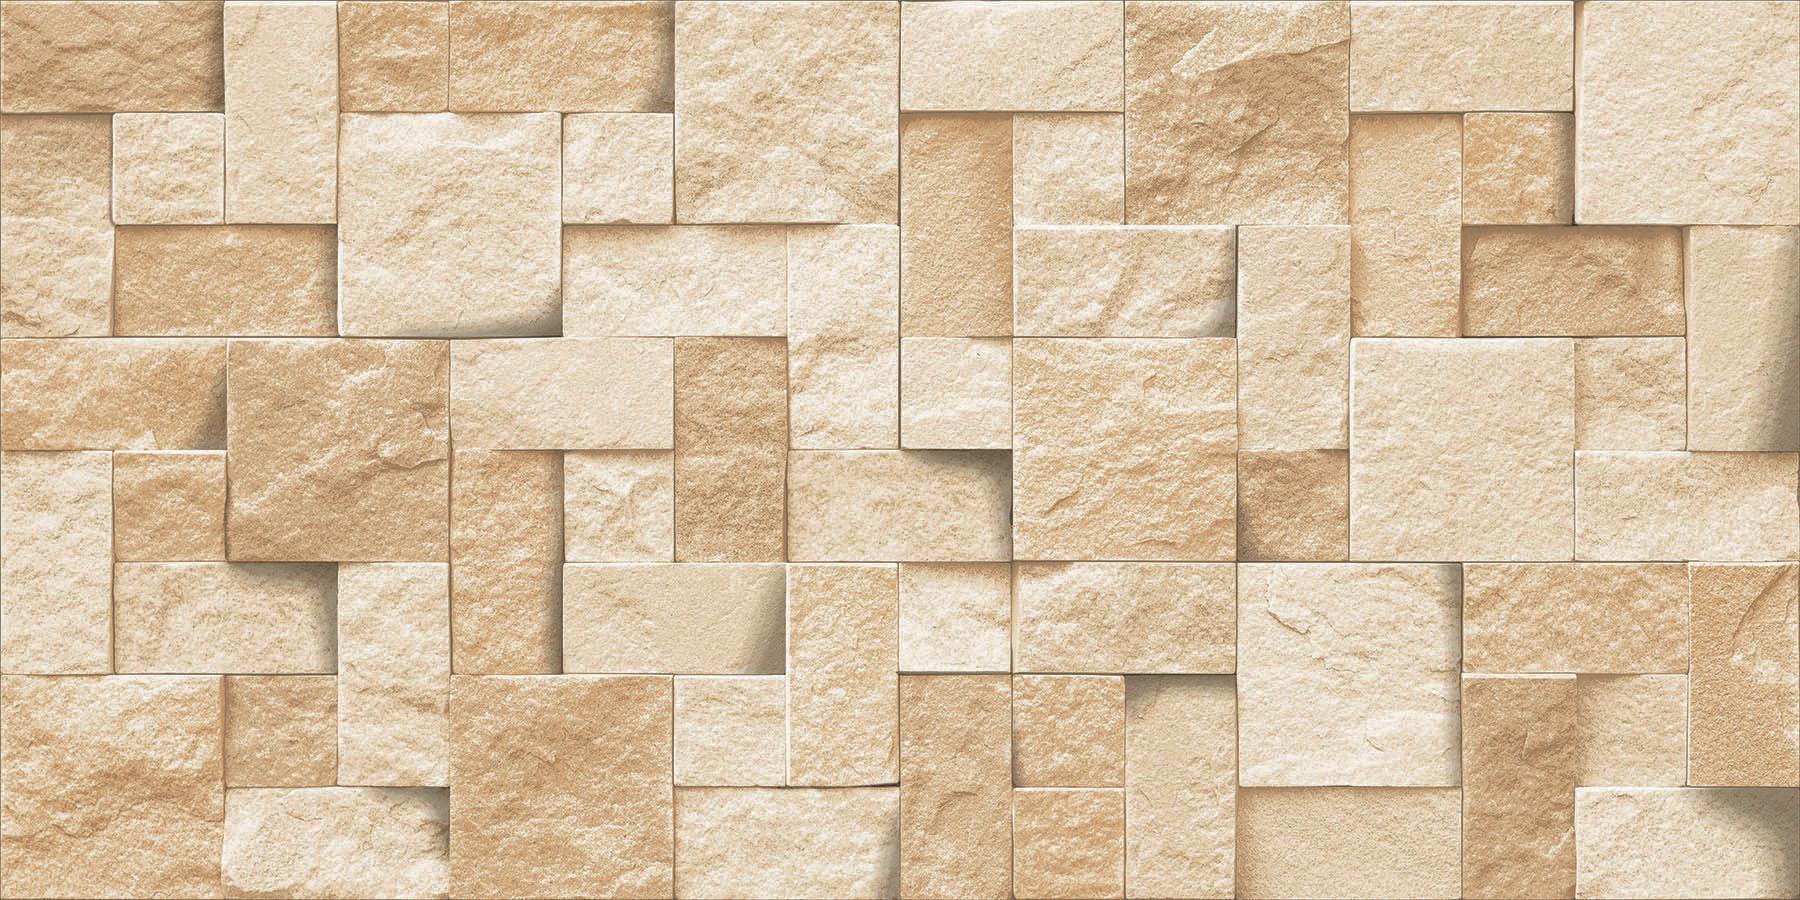 All Tiles for Bathroom Tiles, Living Room Tiles, Elevation Tiles, Accent Tiles, Hospital Tiles, Commercial/Office, Outdoor Area, School & Collages